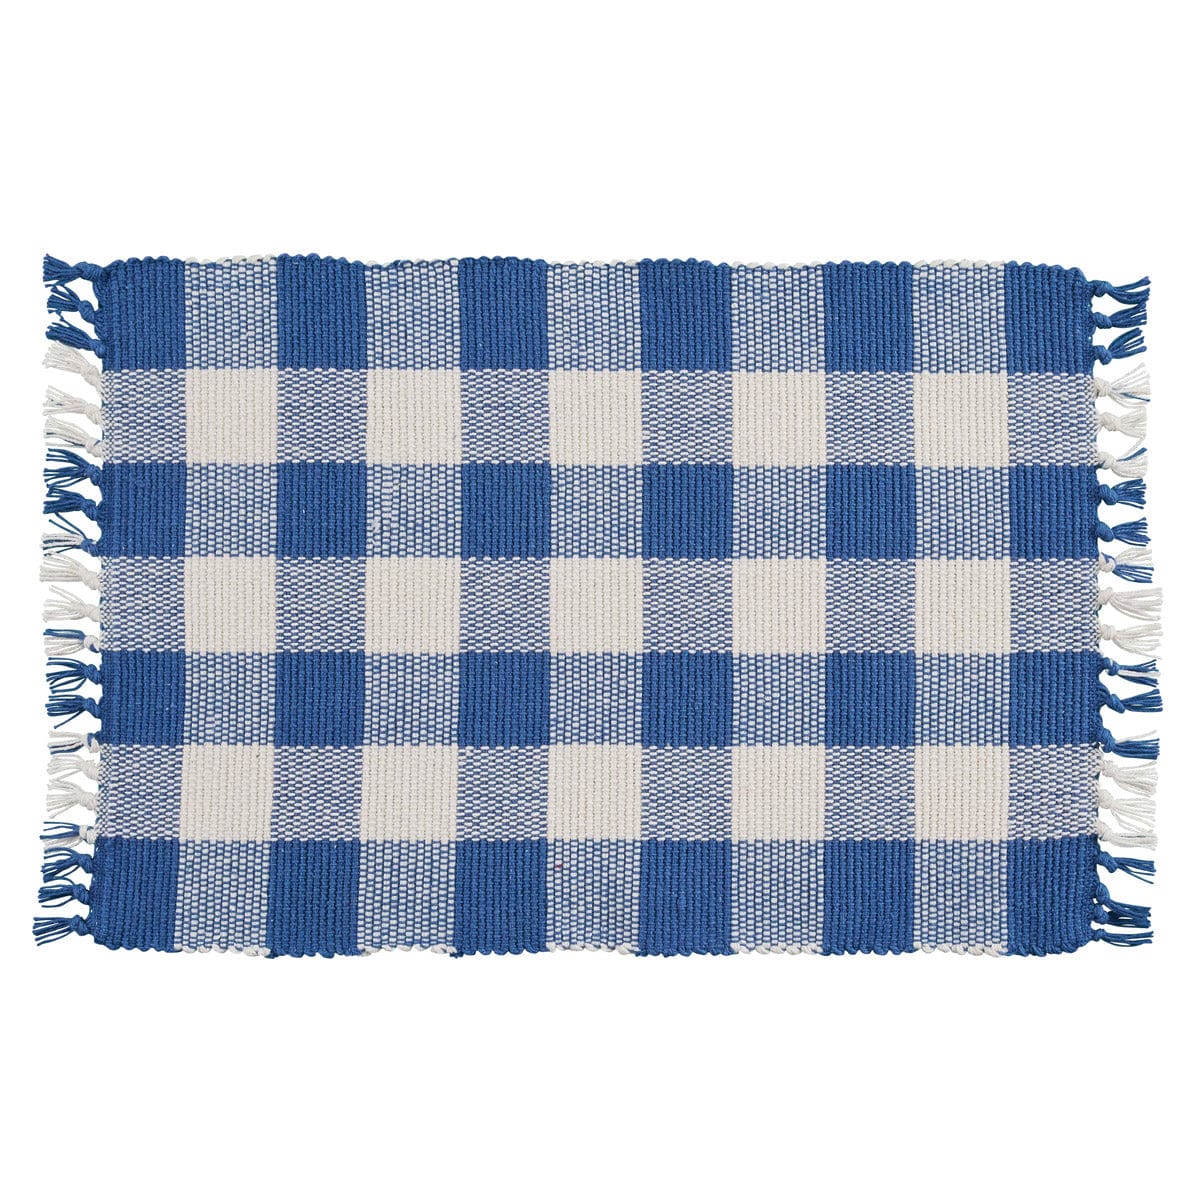 Wicklow Check in China Blue Placemat-Park Designs-The Village Merchant